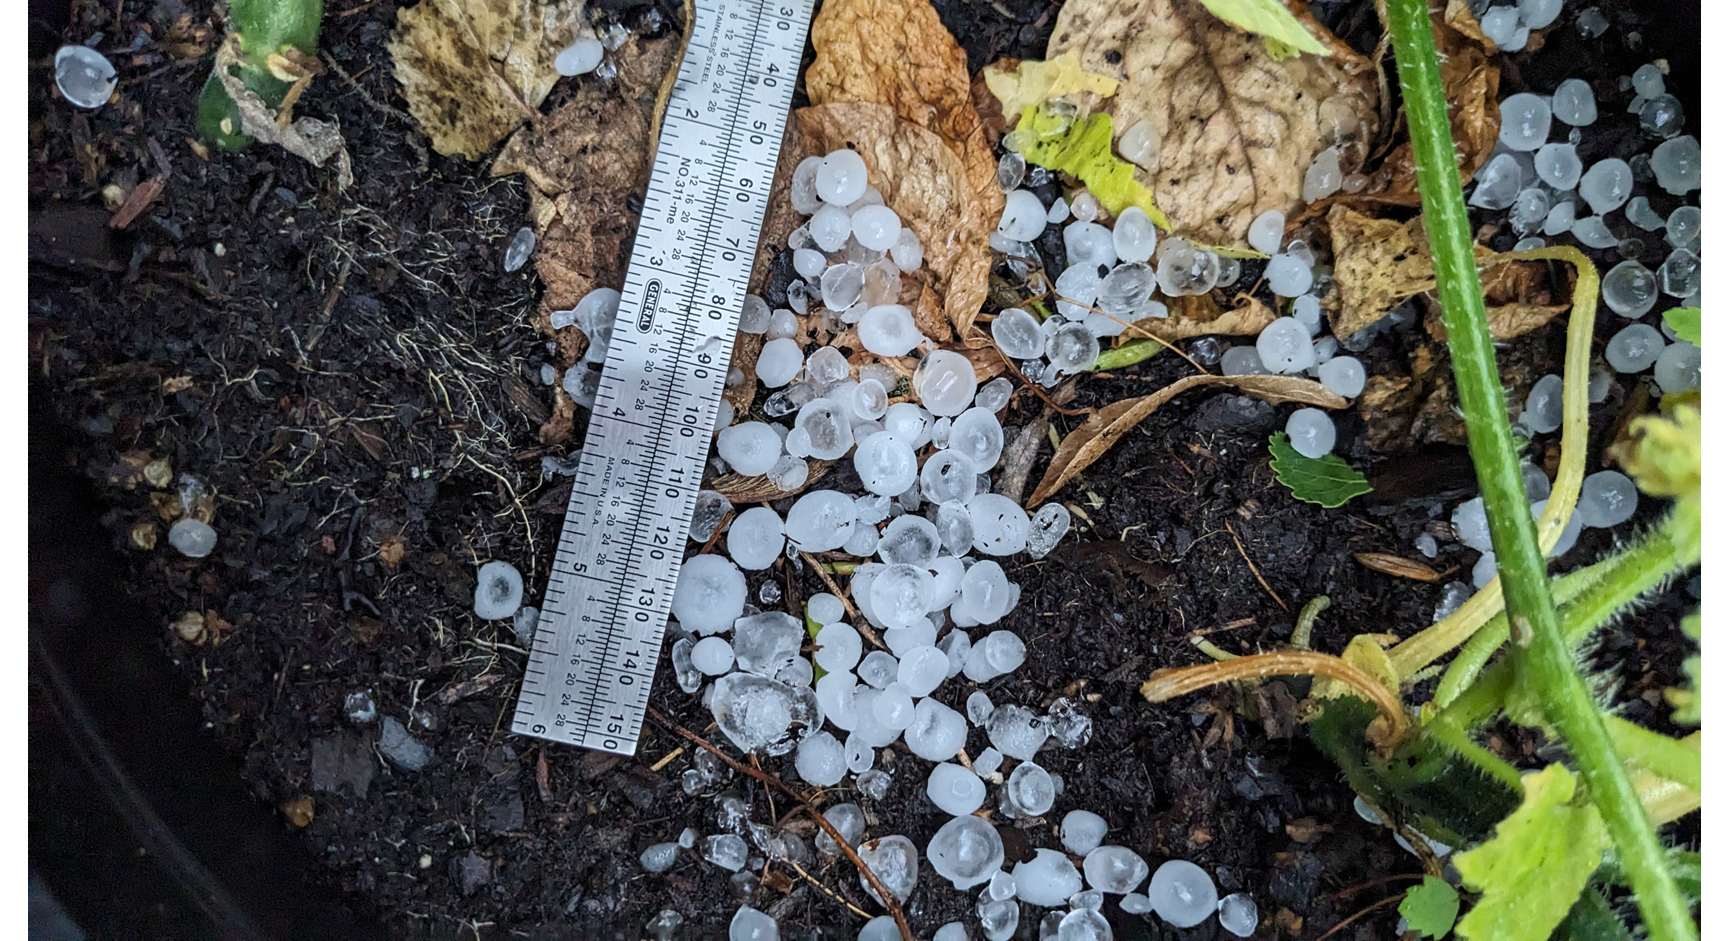 Numerous hail stones on the ground with a ruler next to them for size reference.